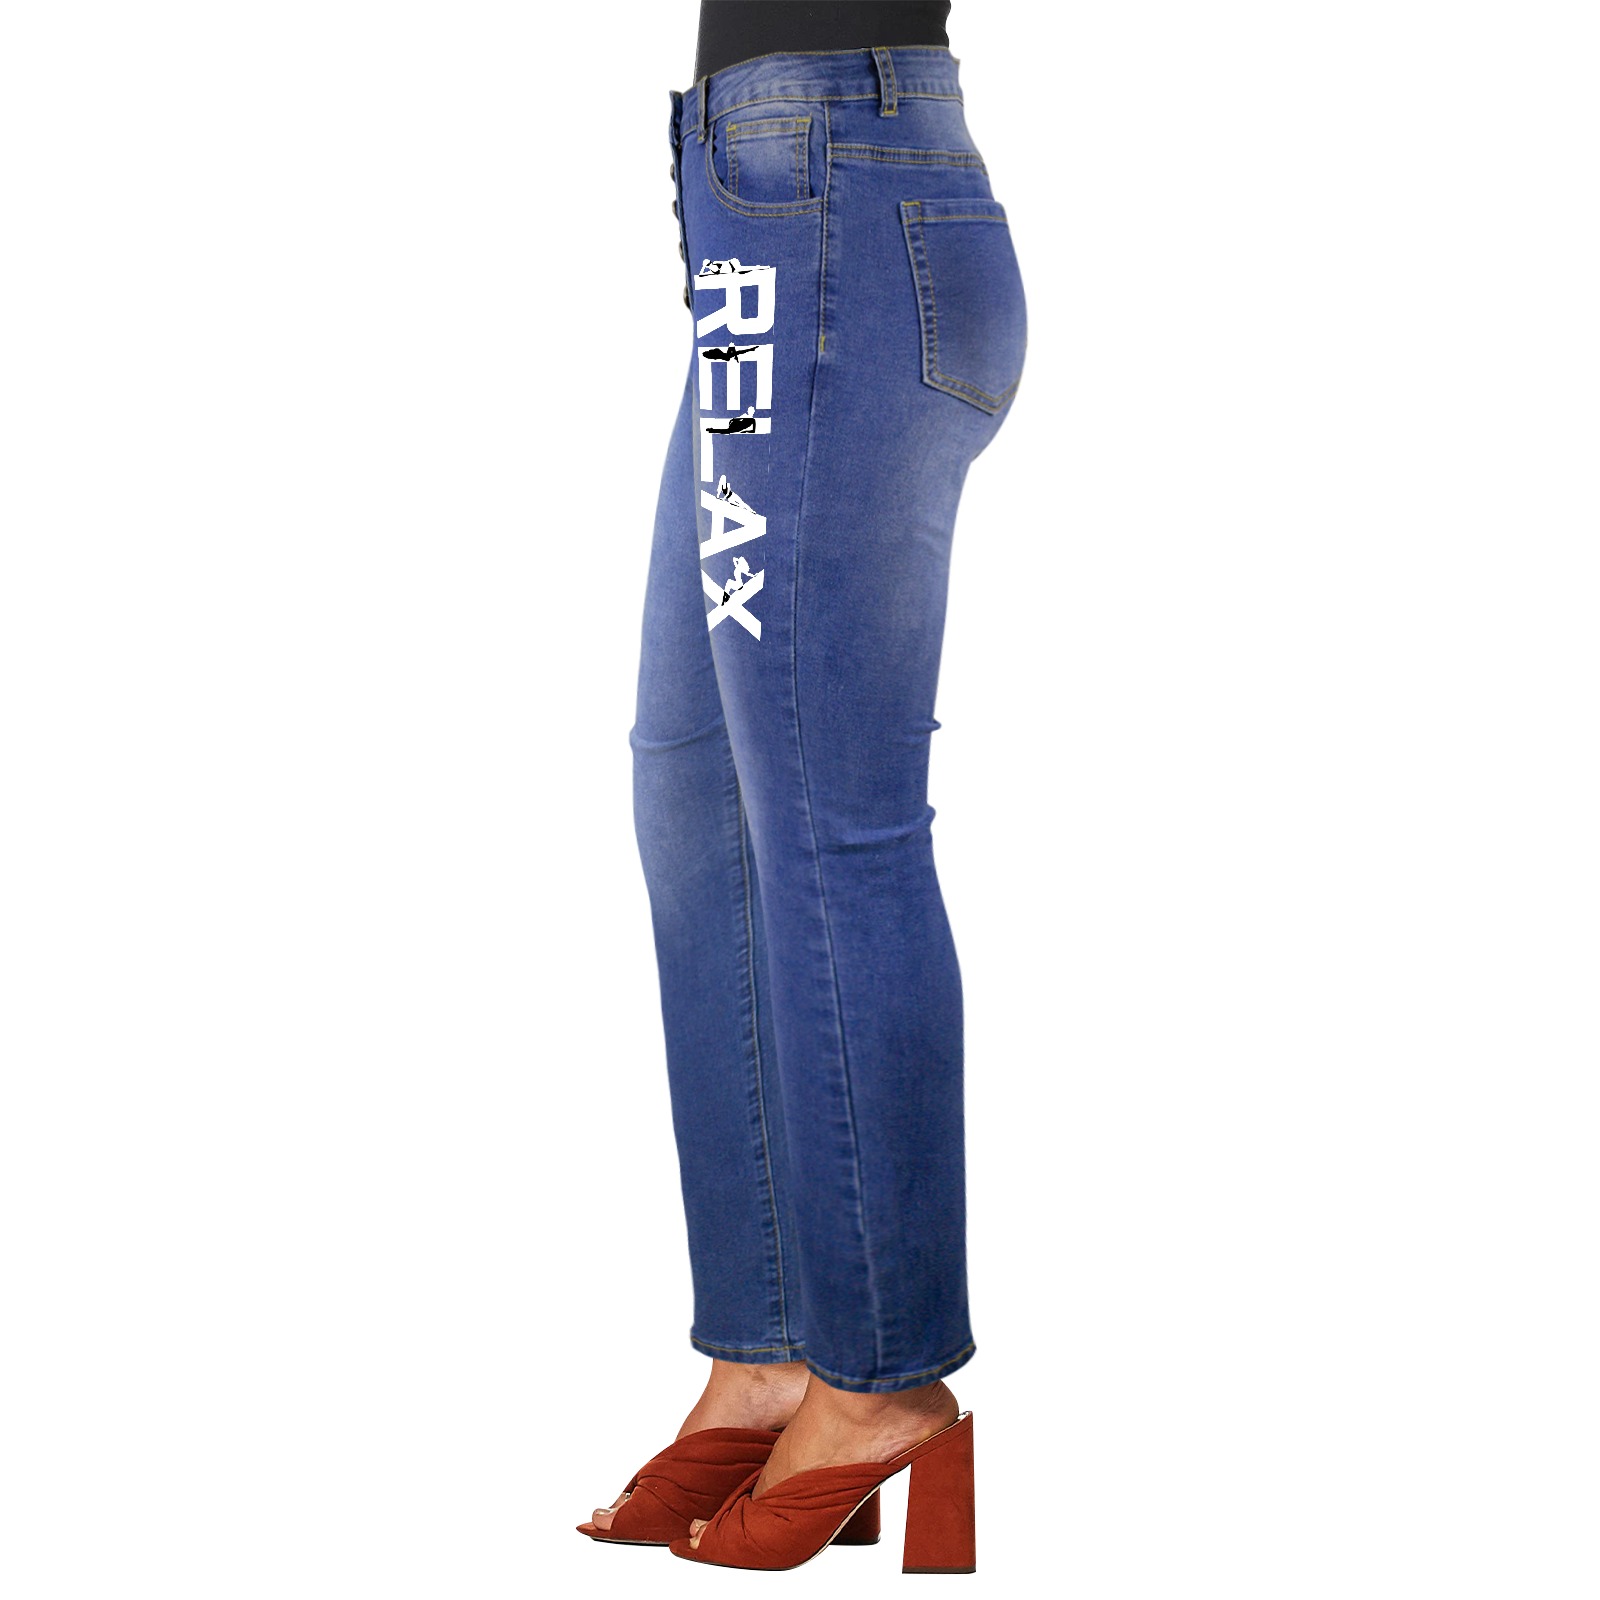 Relax white text and silhouettes of relaxing women Women's Jeans (Front Printing)